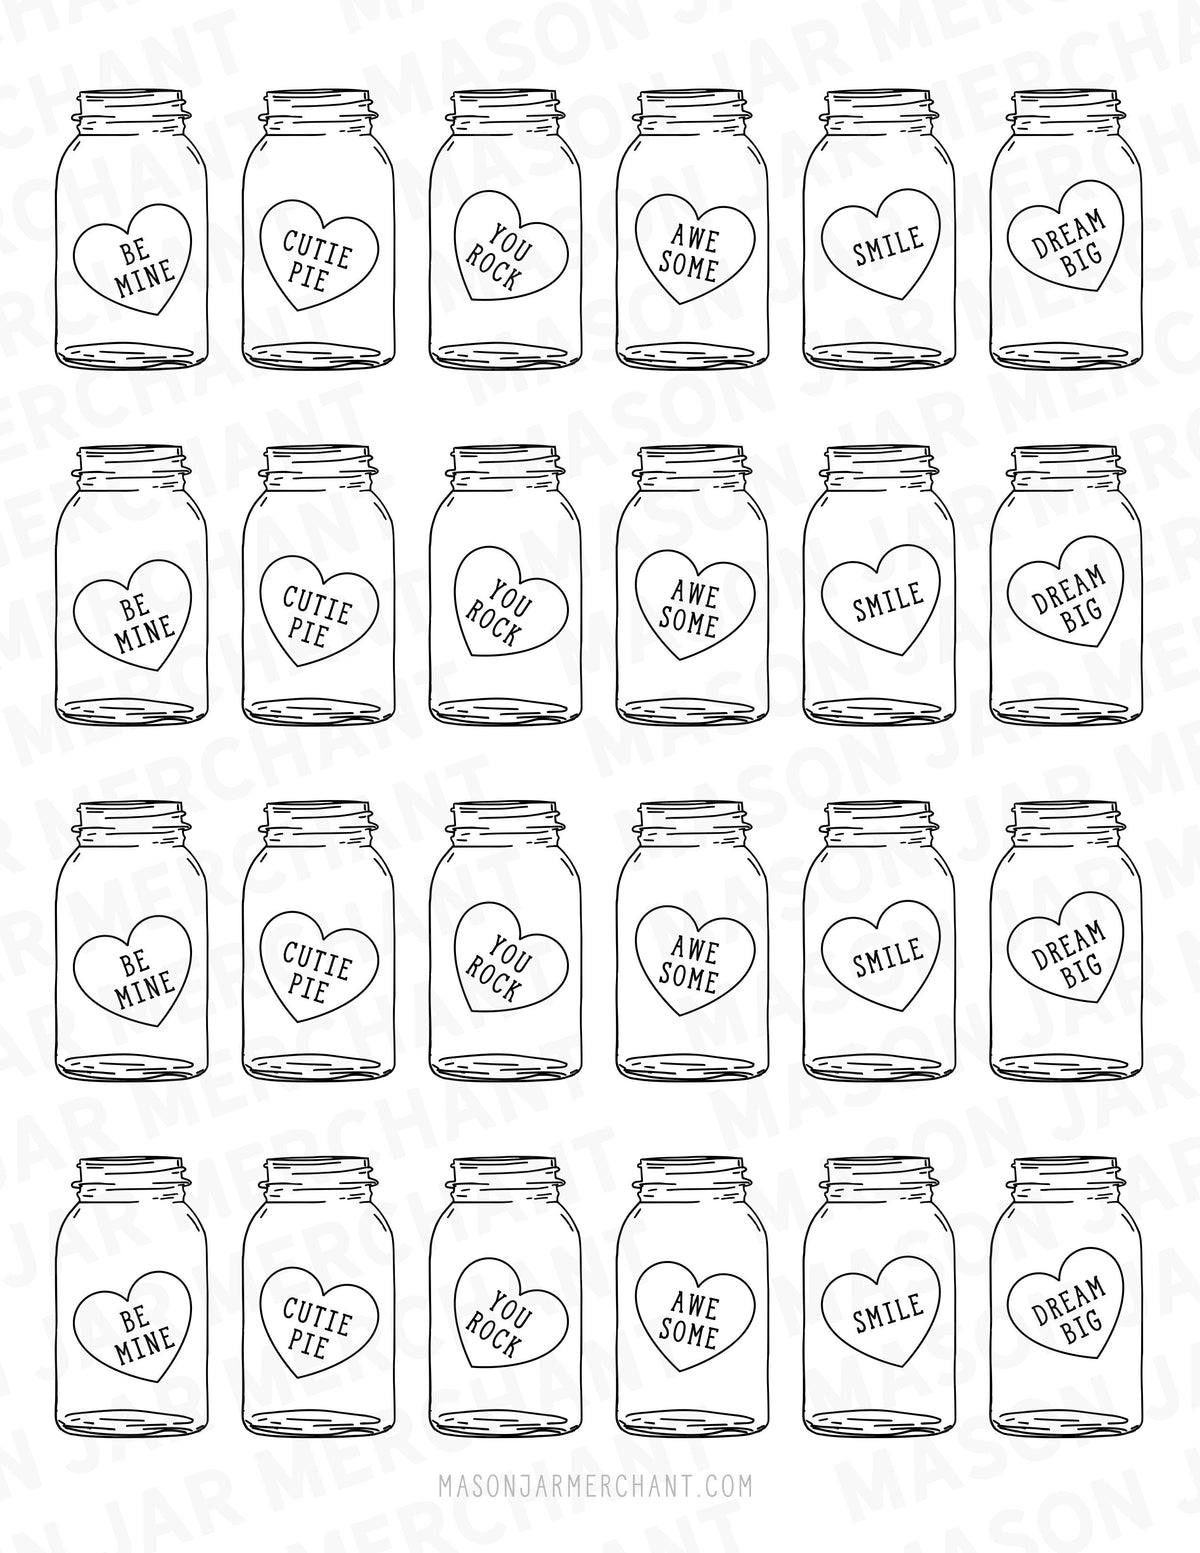 black and white candy heart mason jar shaped valentines PDF Studio3 and SVG download color and cut and use as gift tags